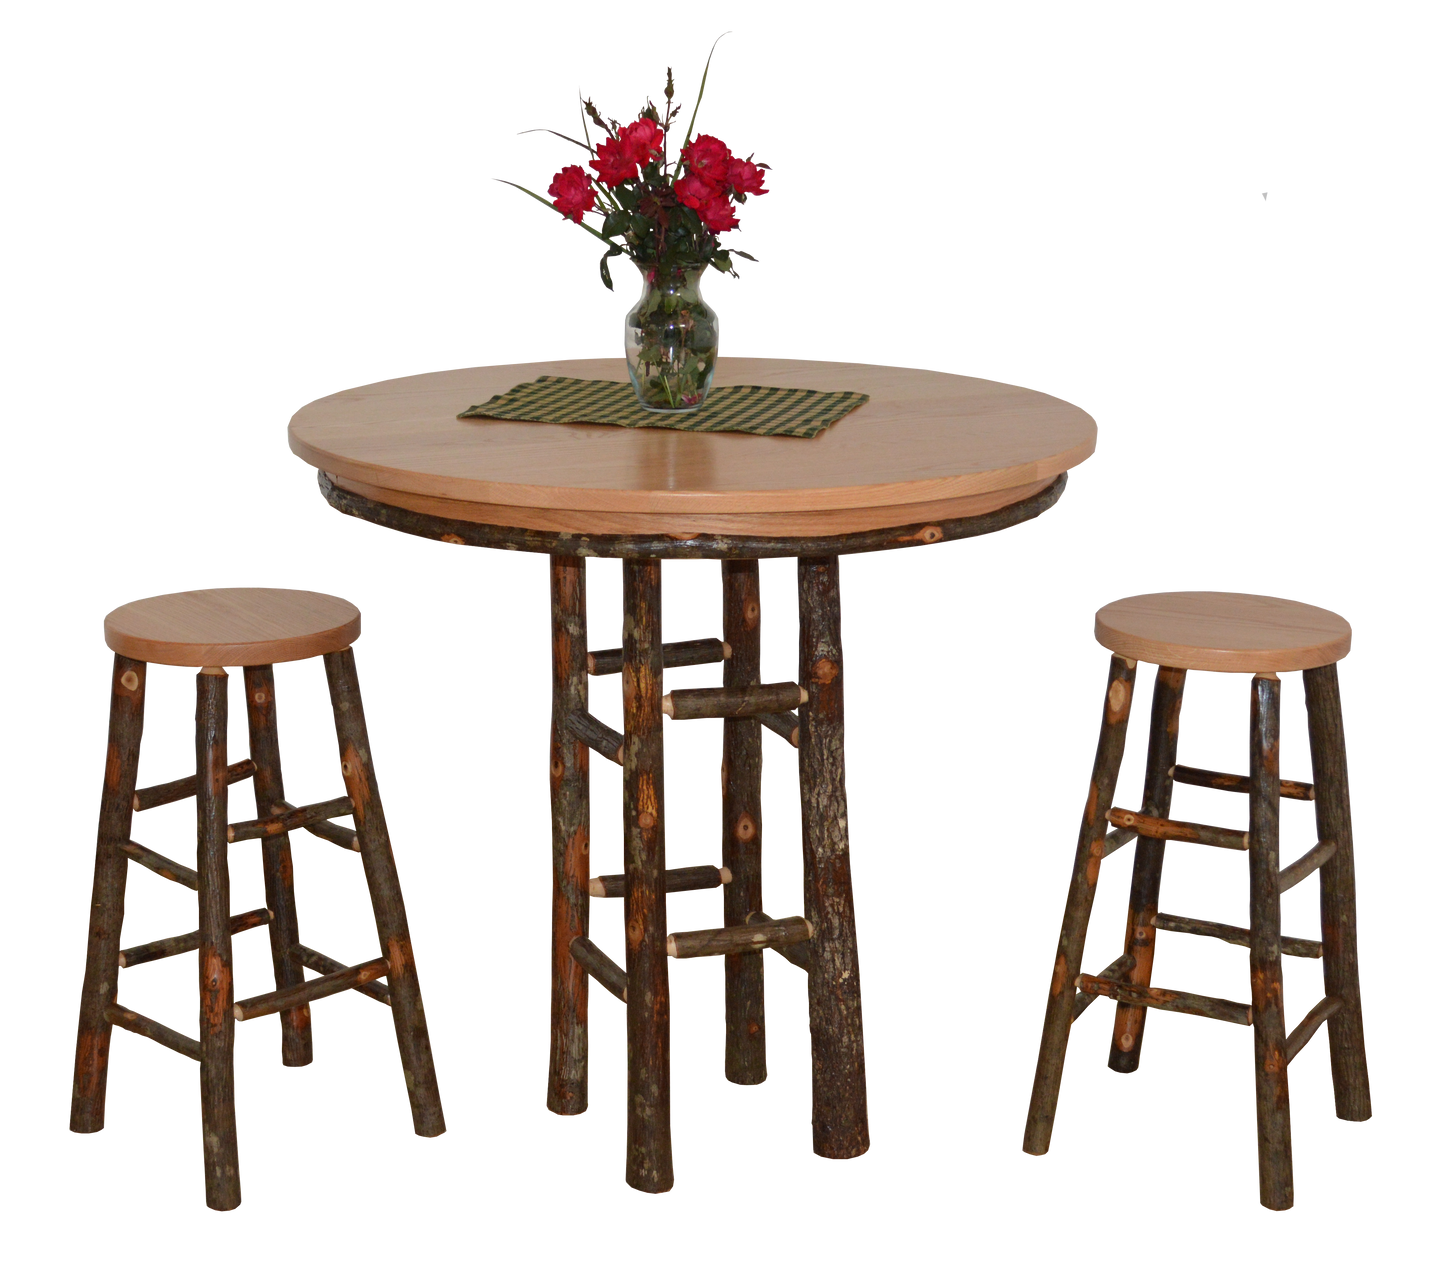 A&L Furniture Co. 42" Round Hickory Bar Table - LEAD TIME TO SHIP 4 WEEKS OR LESS